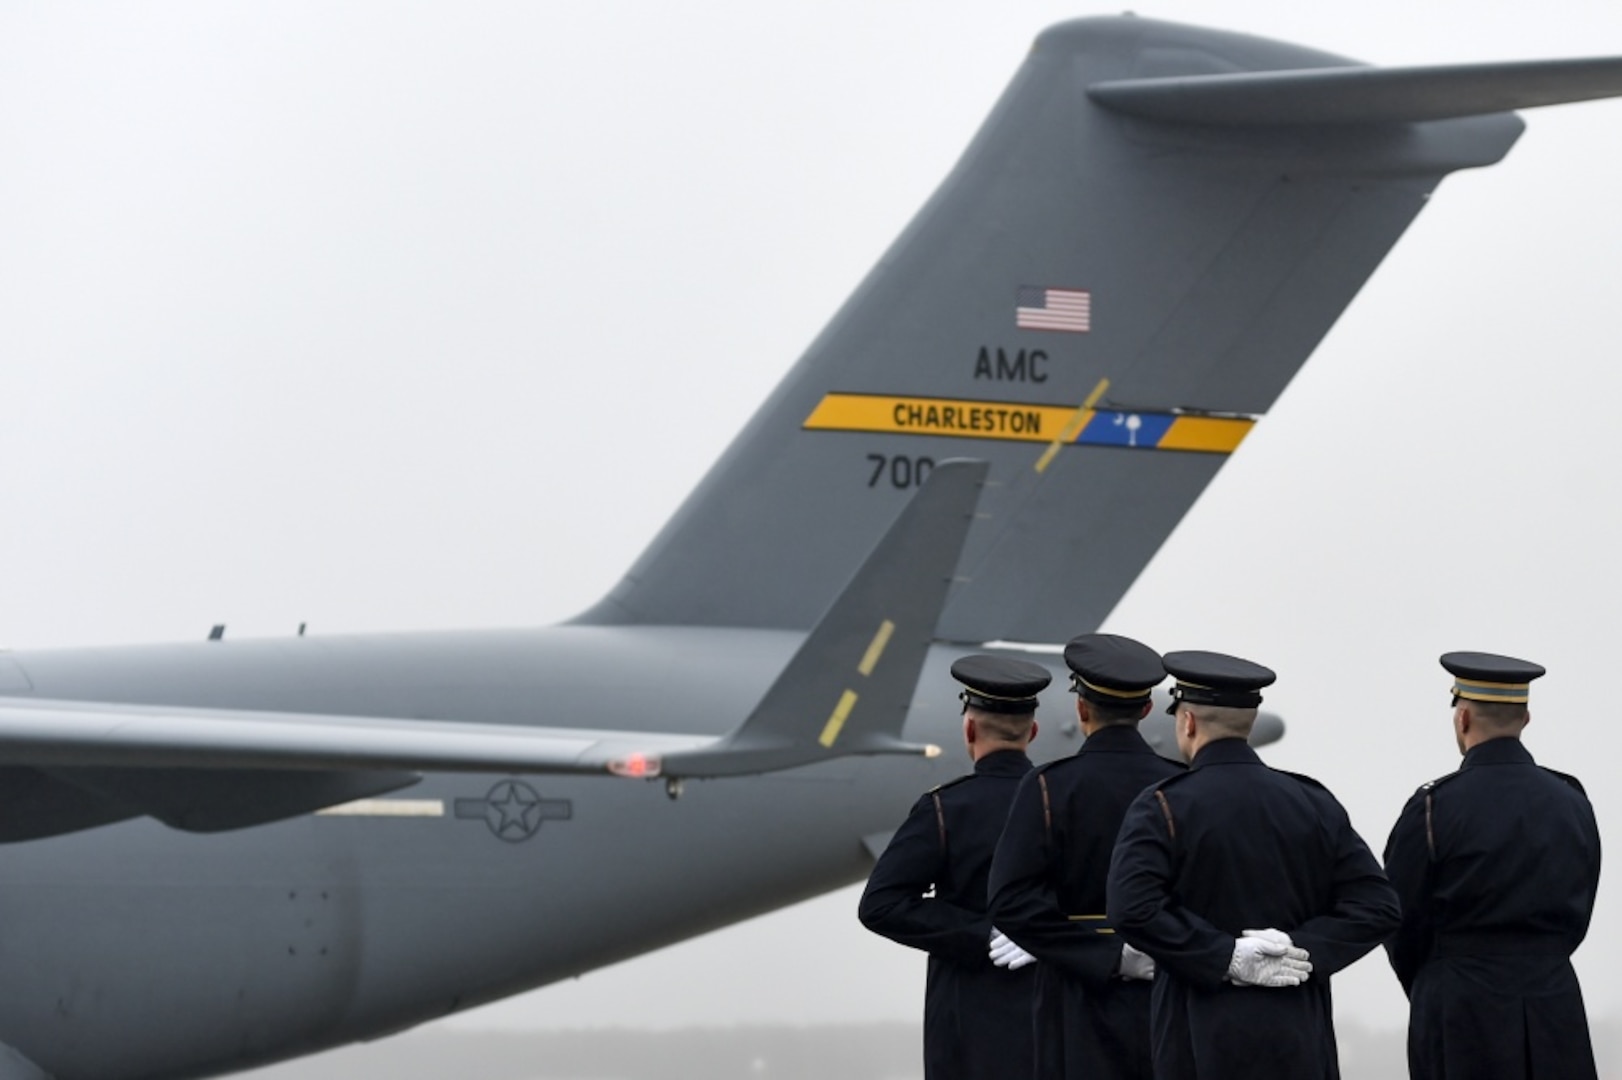 The U.S. Army 3rd Infantry Regiment (The Old Guard) body bearer team falls into formation as an Air Mobility Command C-17 Globemaster III arrives at Joint Base Andrews, Md. with the remains of World War II Army veteran and former Rep. John D. Dingell (D-Mich.) Feb. 12, 2019.